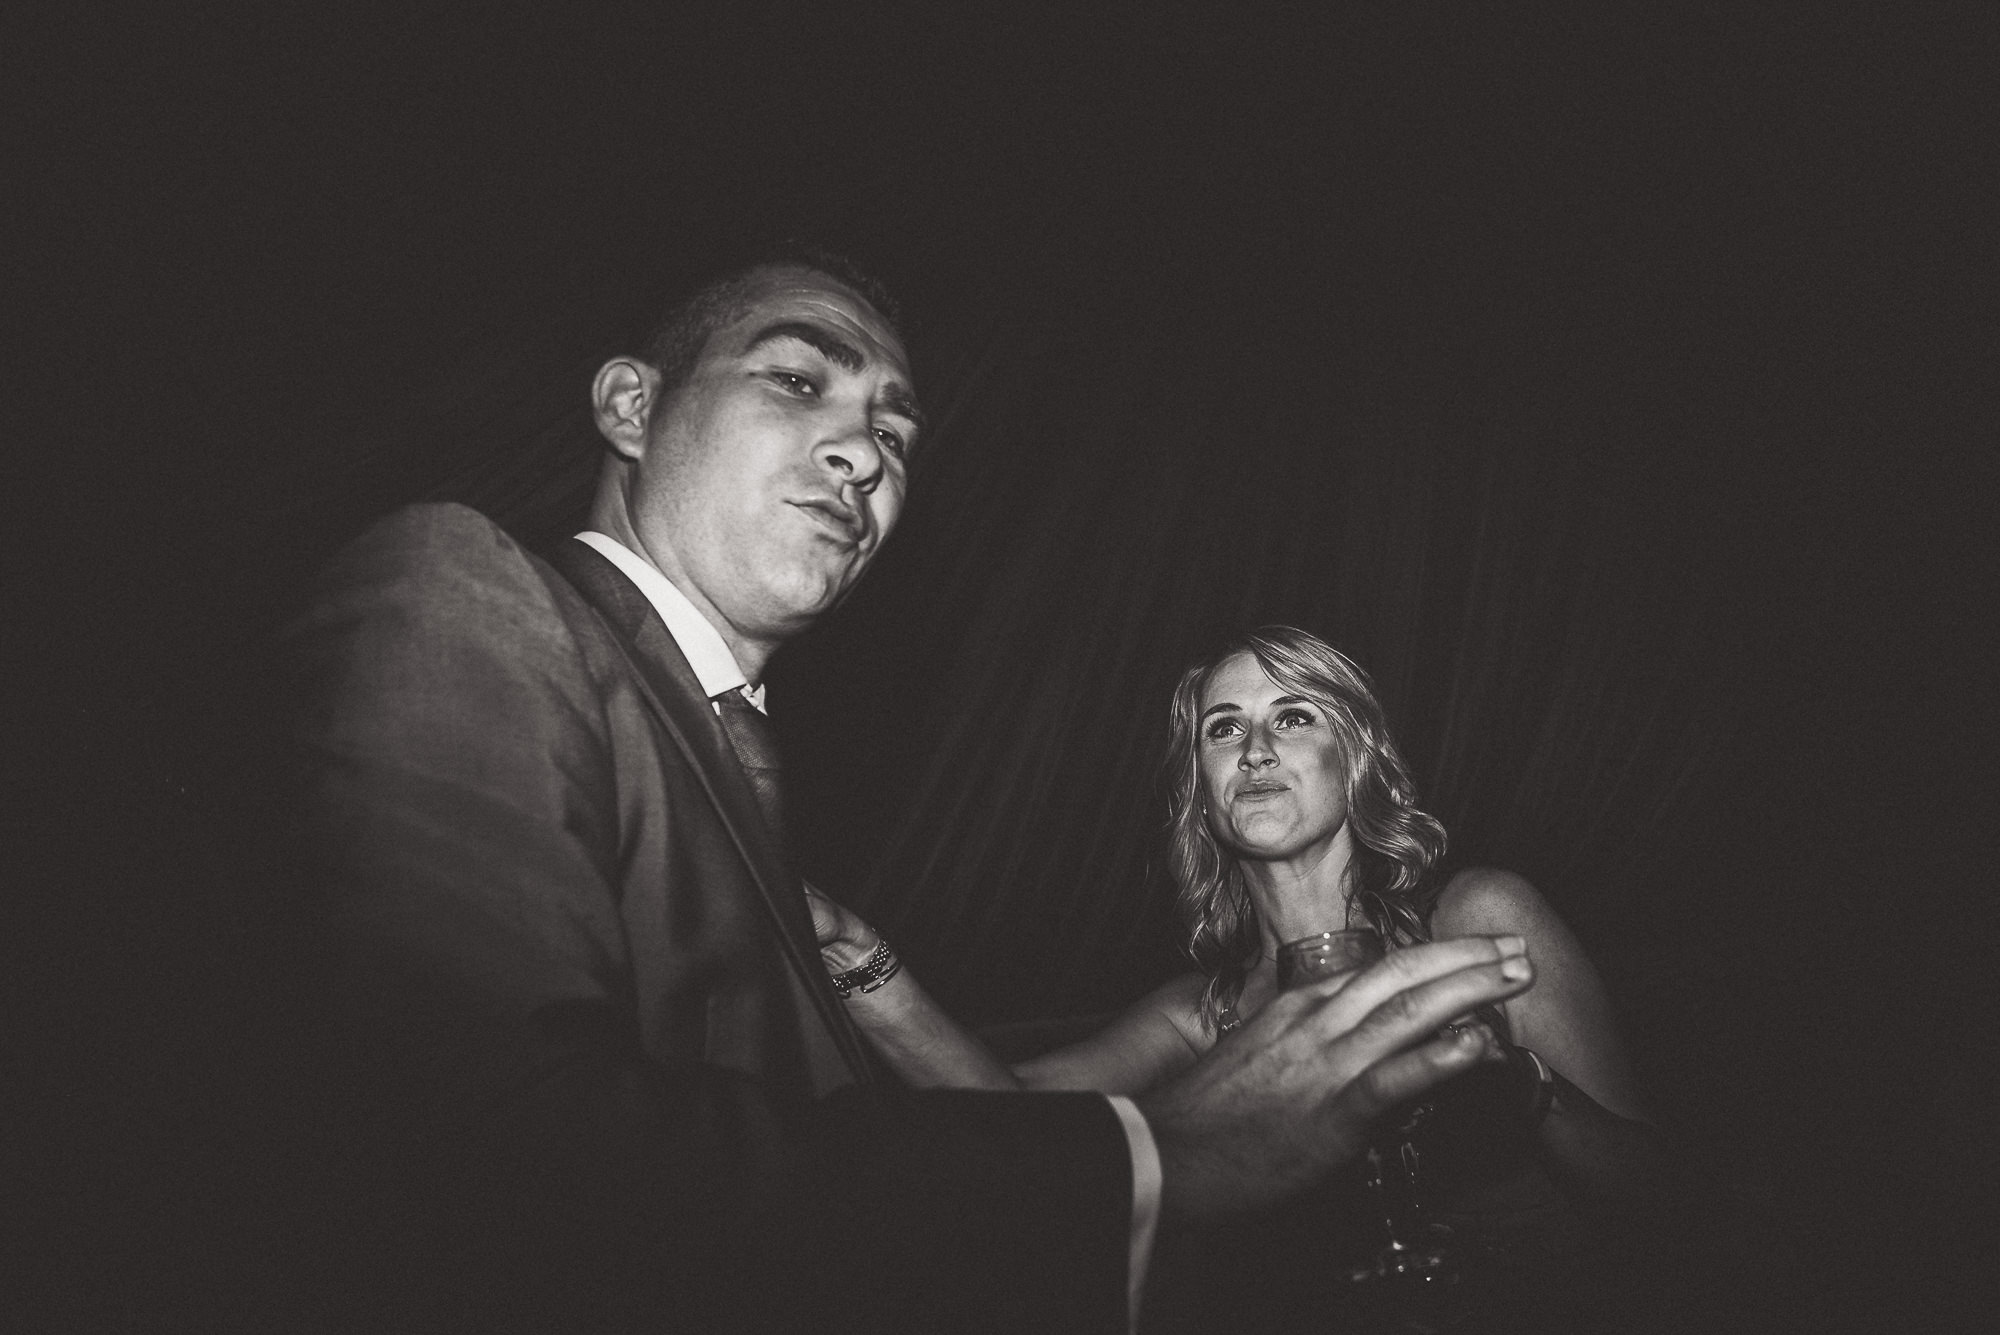 A black and white photo capturing the bride and groom dancing at their wedding.